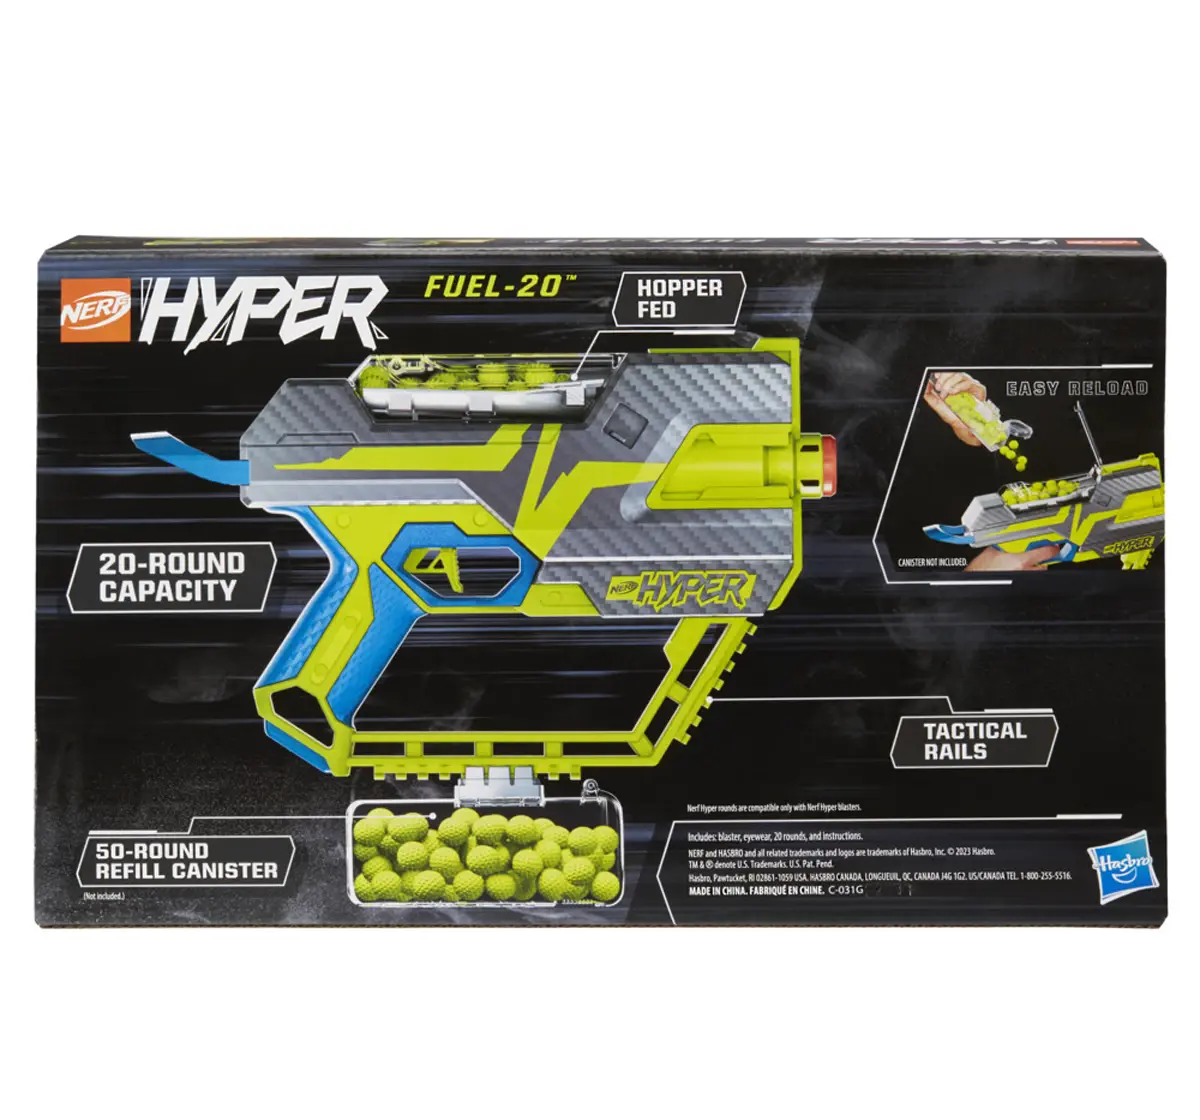 Nerf Hyper Fuel-20 Blaster, 20 Nerf Hyper Rounds, Up To 110 FPS Velocity, Hopper Fed, 20-Round Capacity, Easy Reload, Eyewear Included, 14Y+